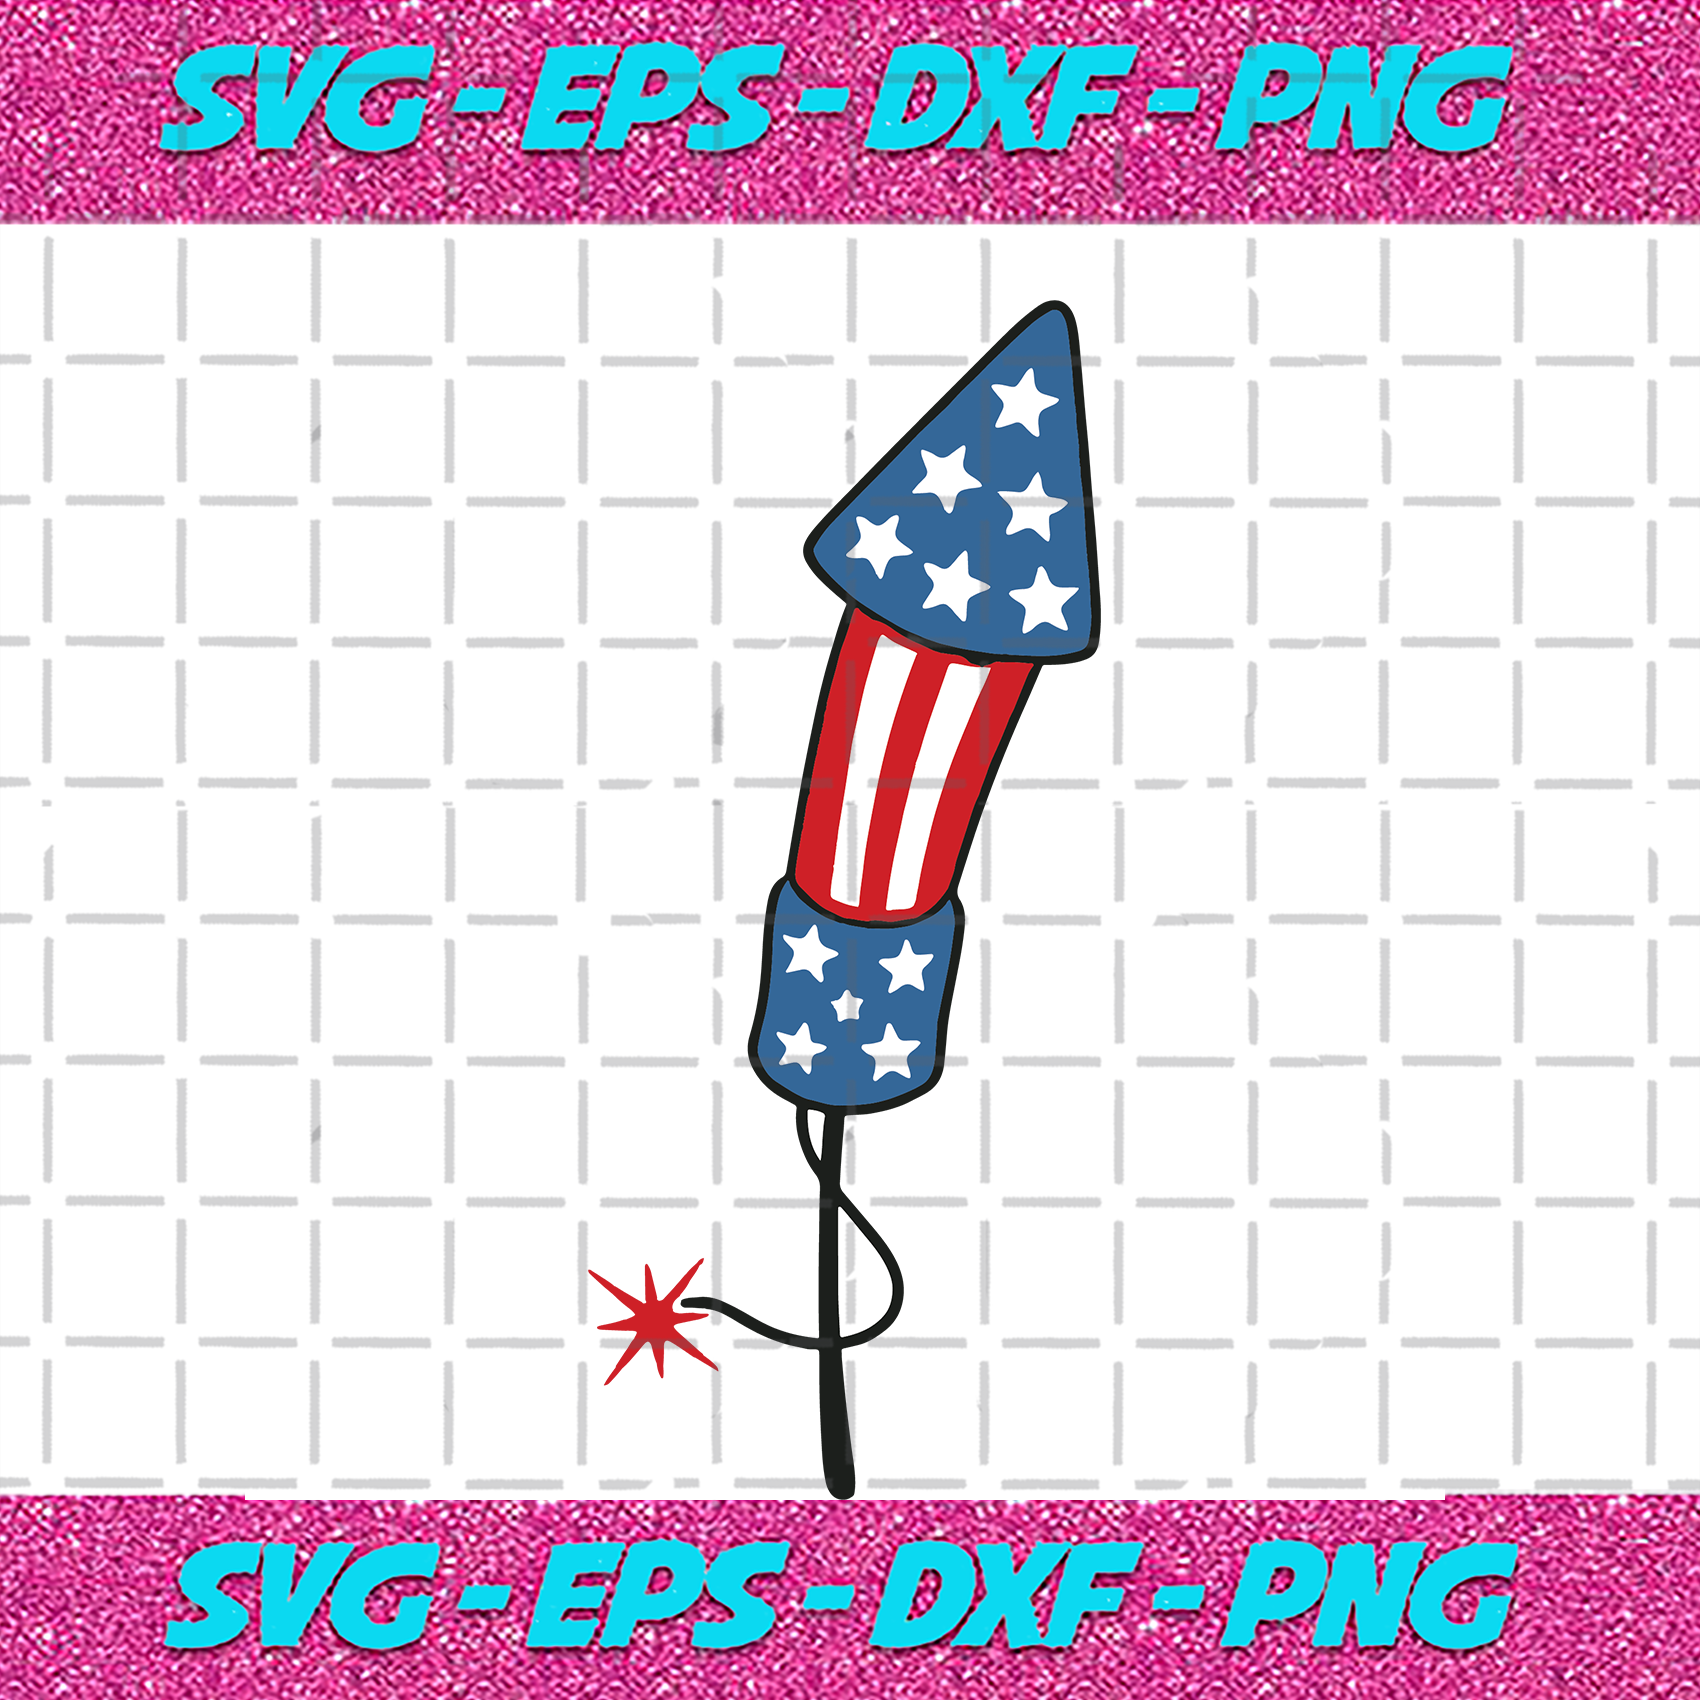 Download United States America Fireworks 4th Of July Patriotic July 4th Independence Day Svg Fireworks Svg Fireworks Gift Free Gift Freedom Day Svg Usa Flag Svg American Flag Stars And Stripes Gift Digital